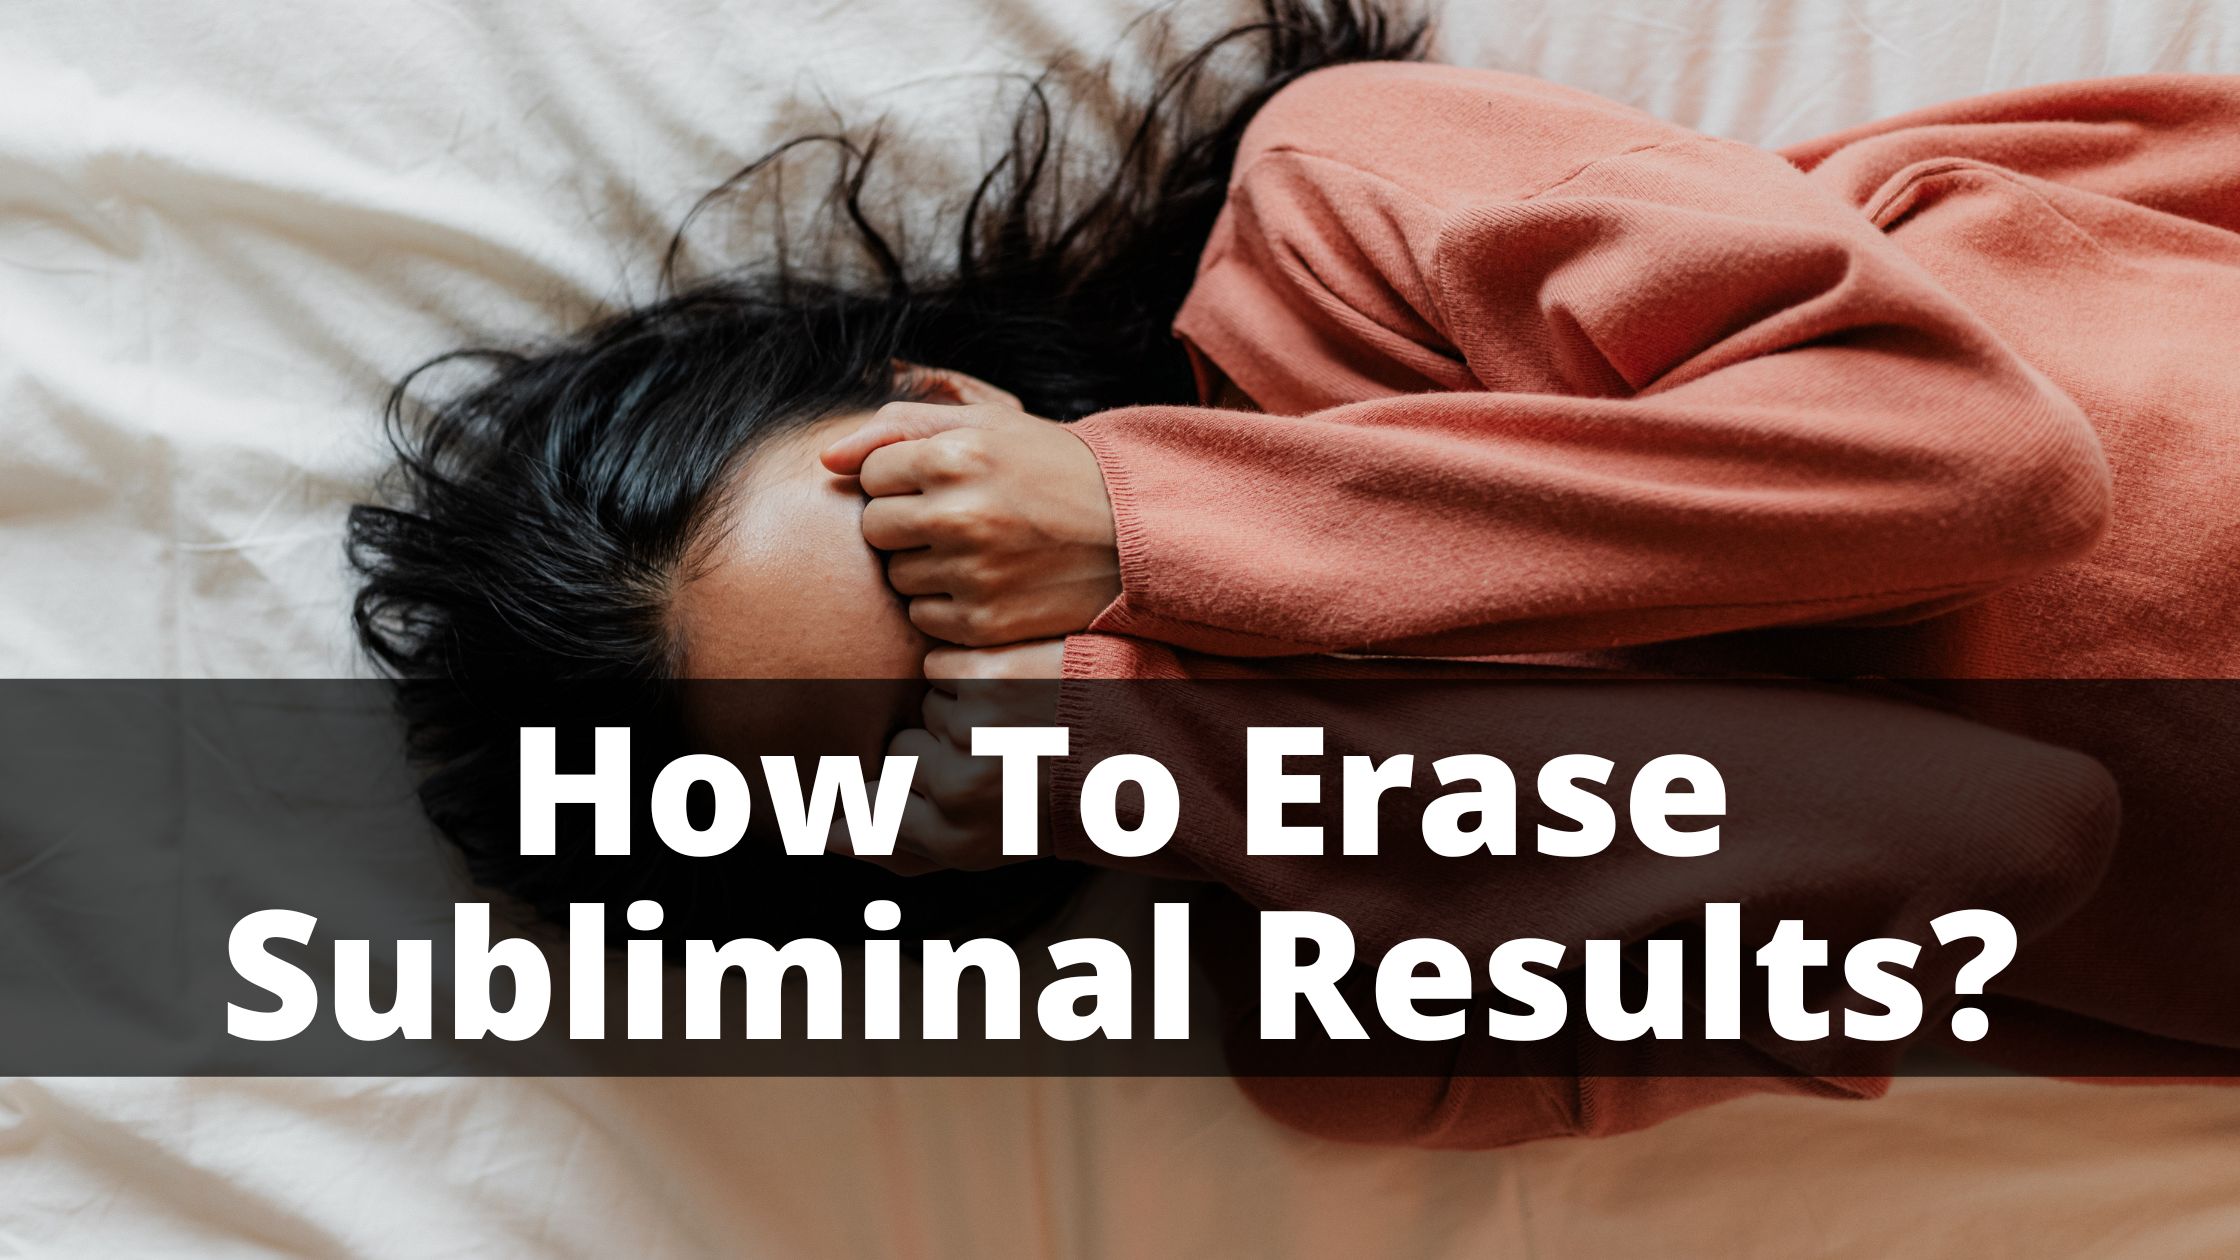 How To Erase Subliminal Results